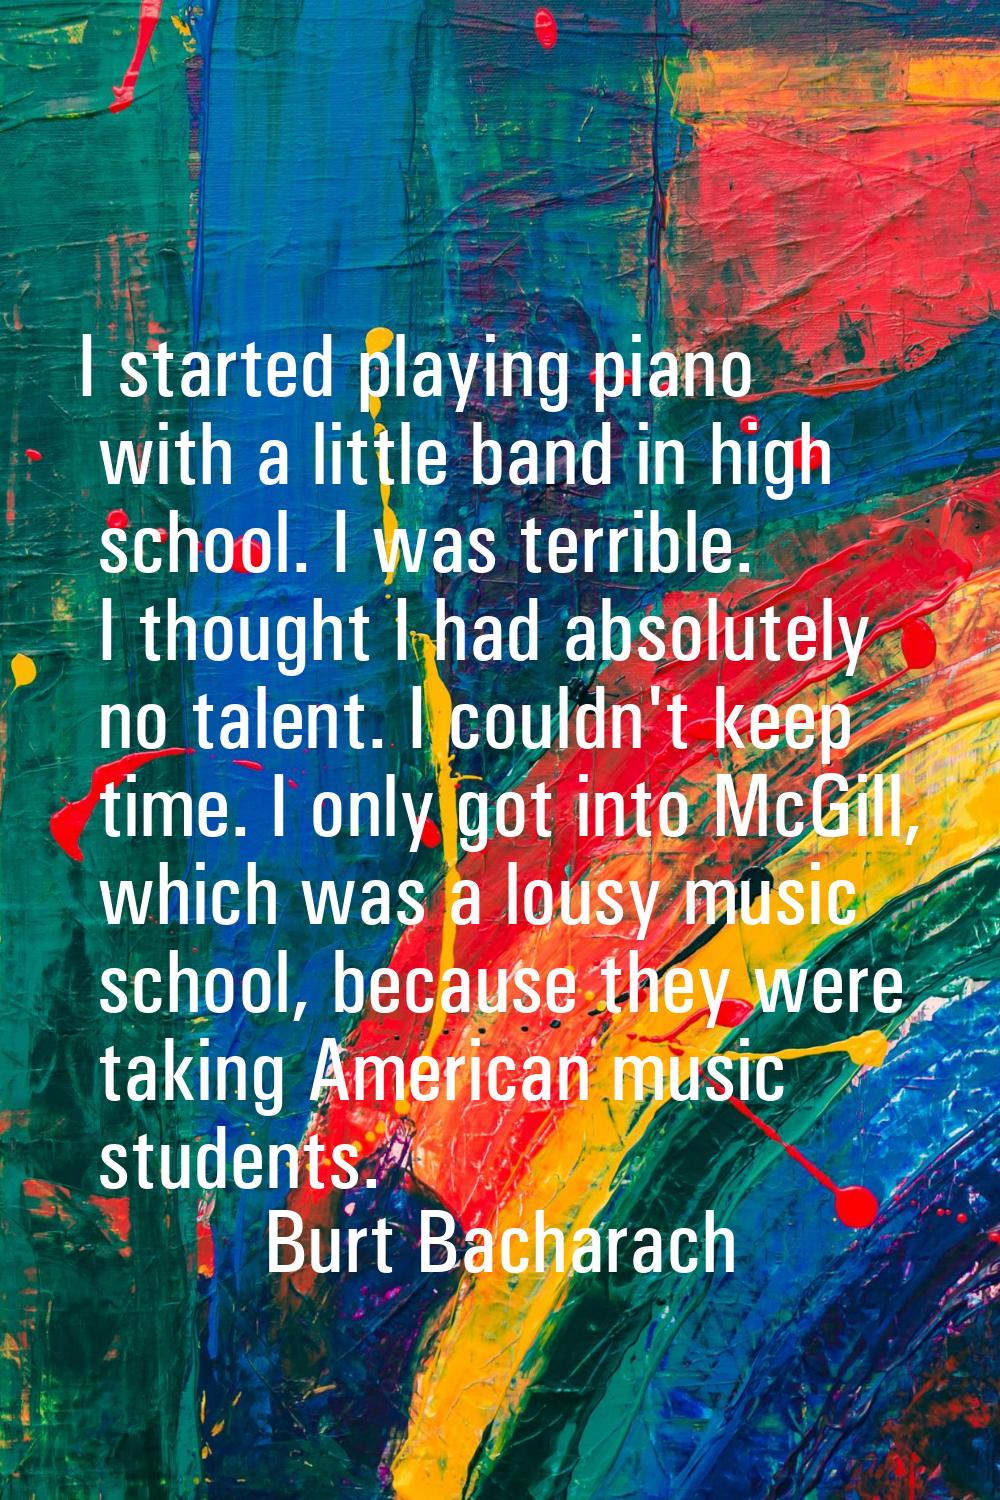 I started playing piano with a little band in high school. I was terrible. I thought I had absolute